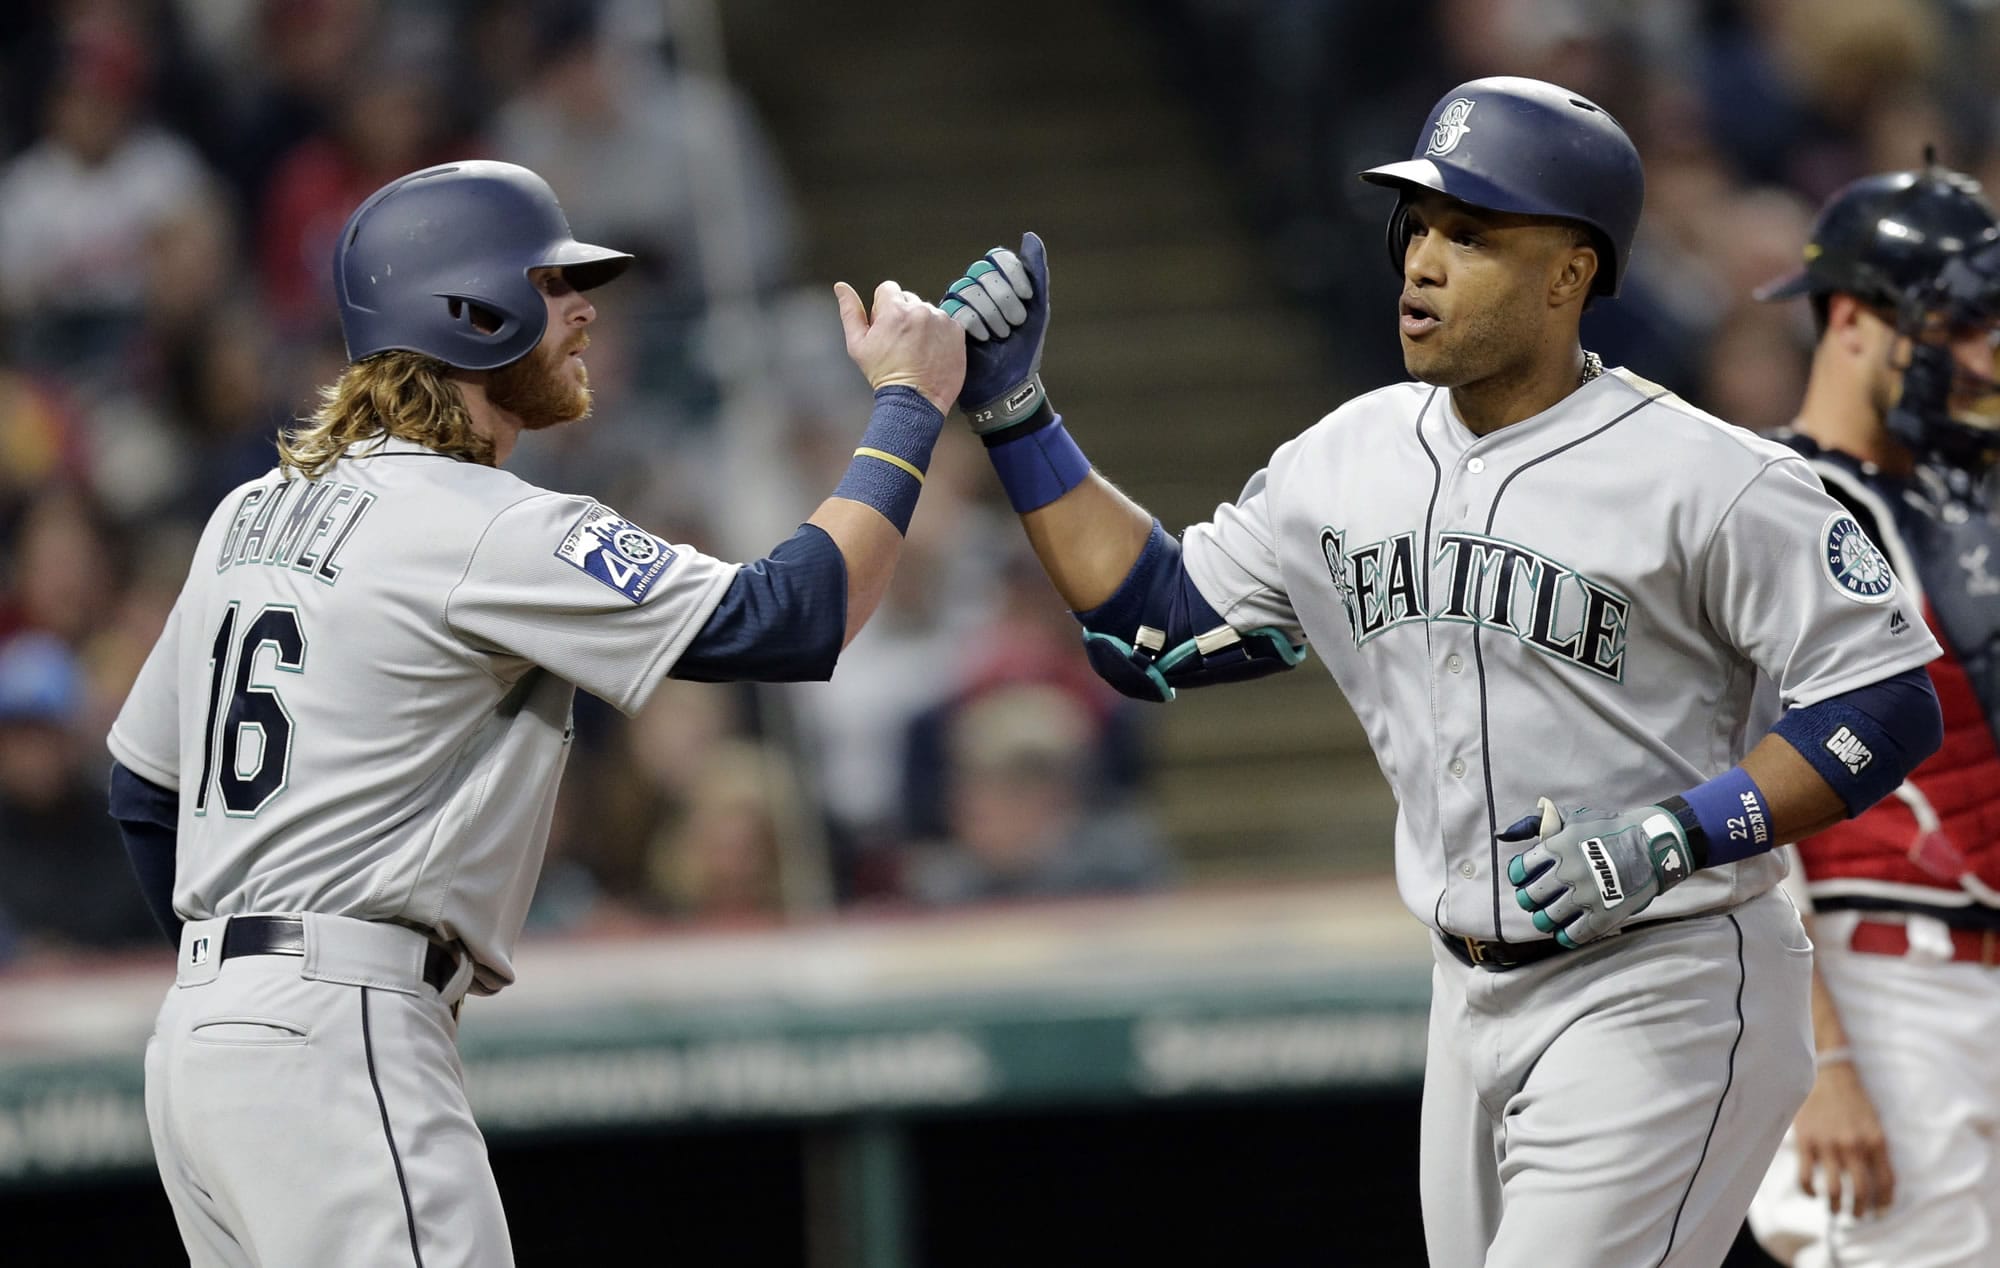 Seattle Mariners' Robinson Cano, right, is congratulated by Ben Gamel after Cano hit a two-run home run off Cleveland Indians starting pitcher Carlos Carrasco during the fourth inning of a baseball game, Friday, April 28, 2017, in Cleveland. Gamel scored on the play.